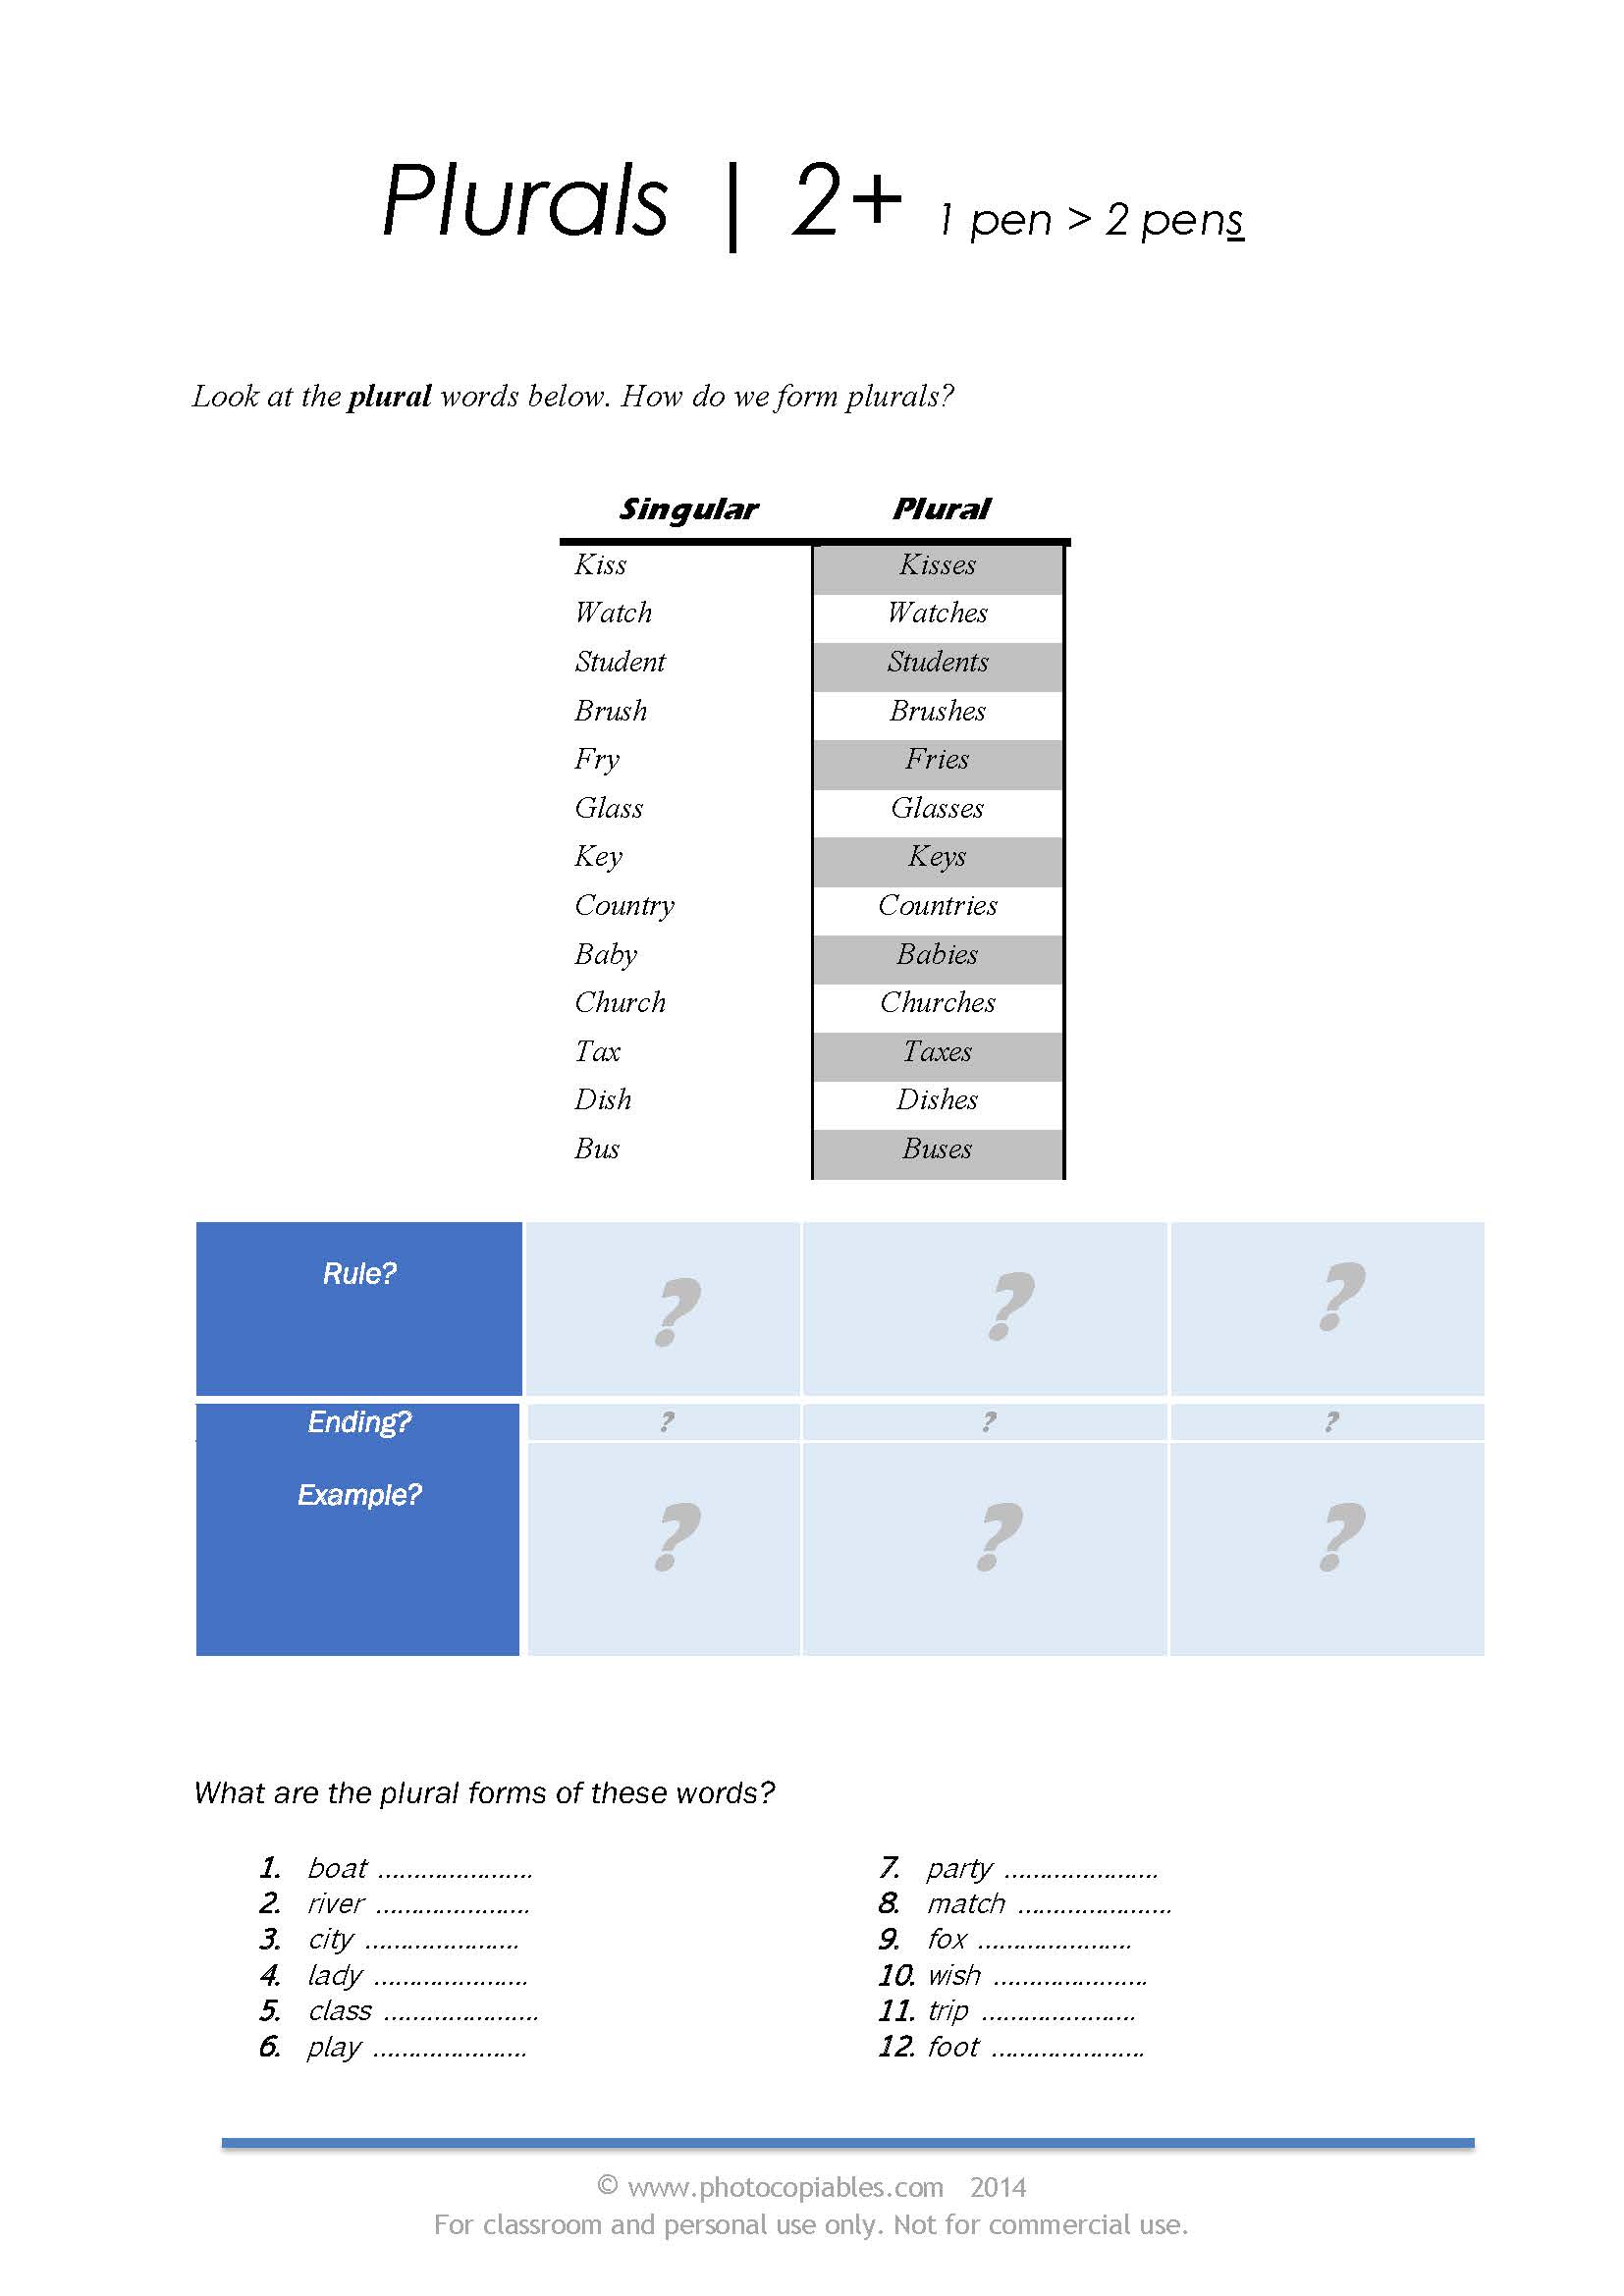 plural-nouns-spelling-rules-lesson-plan-photocopiables